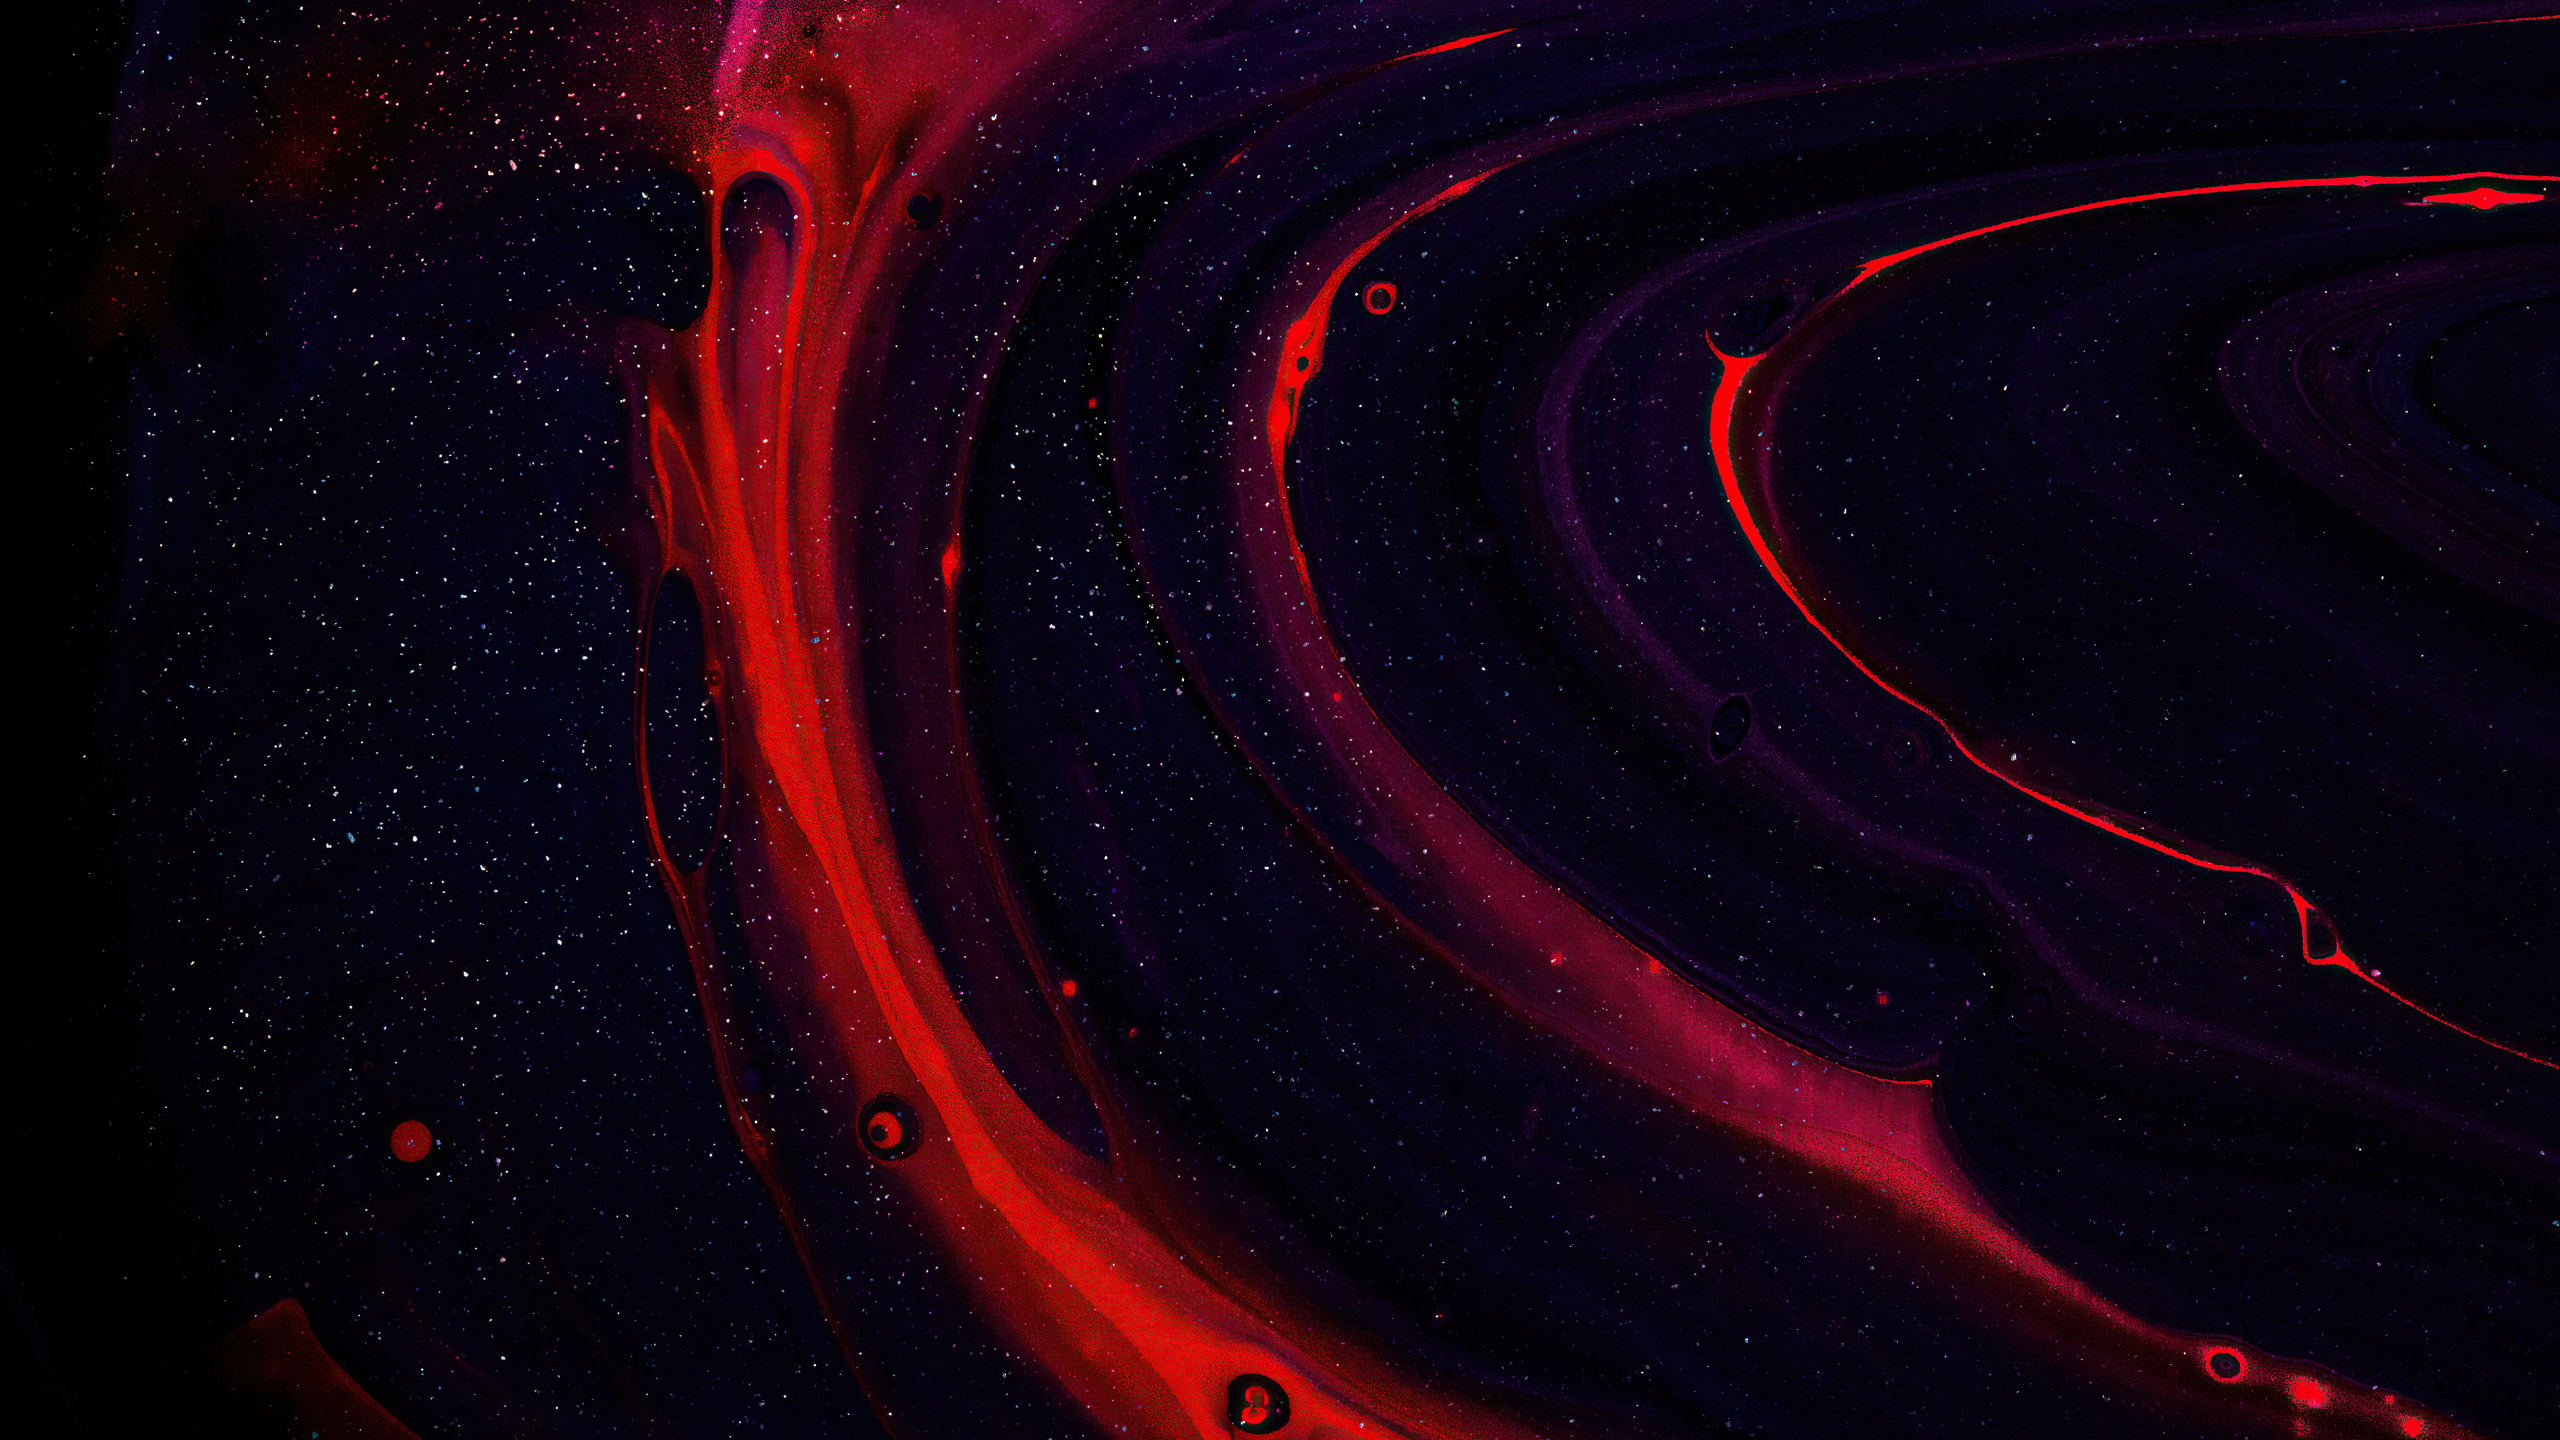 Download wallpaper 2560x1440 dark, outer space, red rings, artwork ...